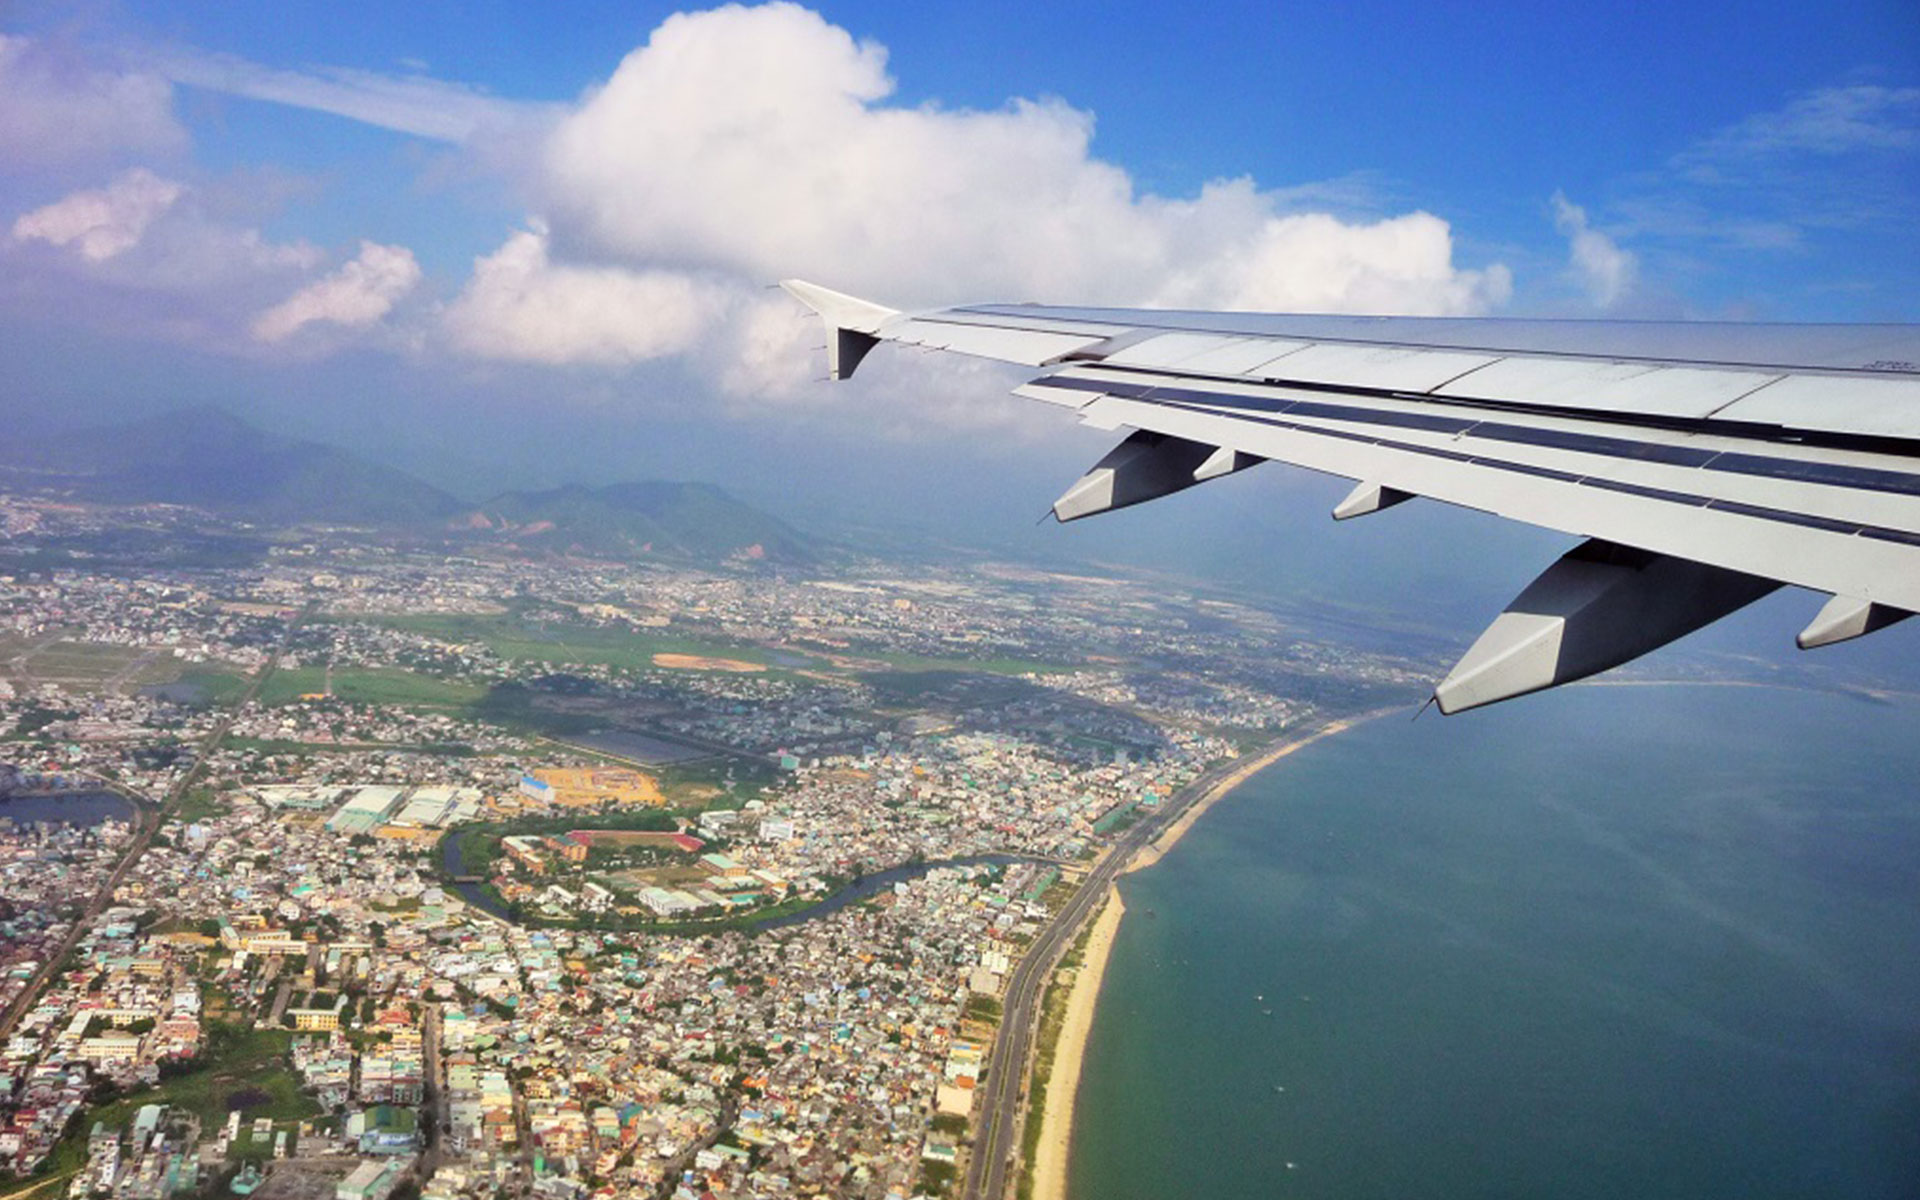 danang from above